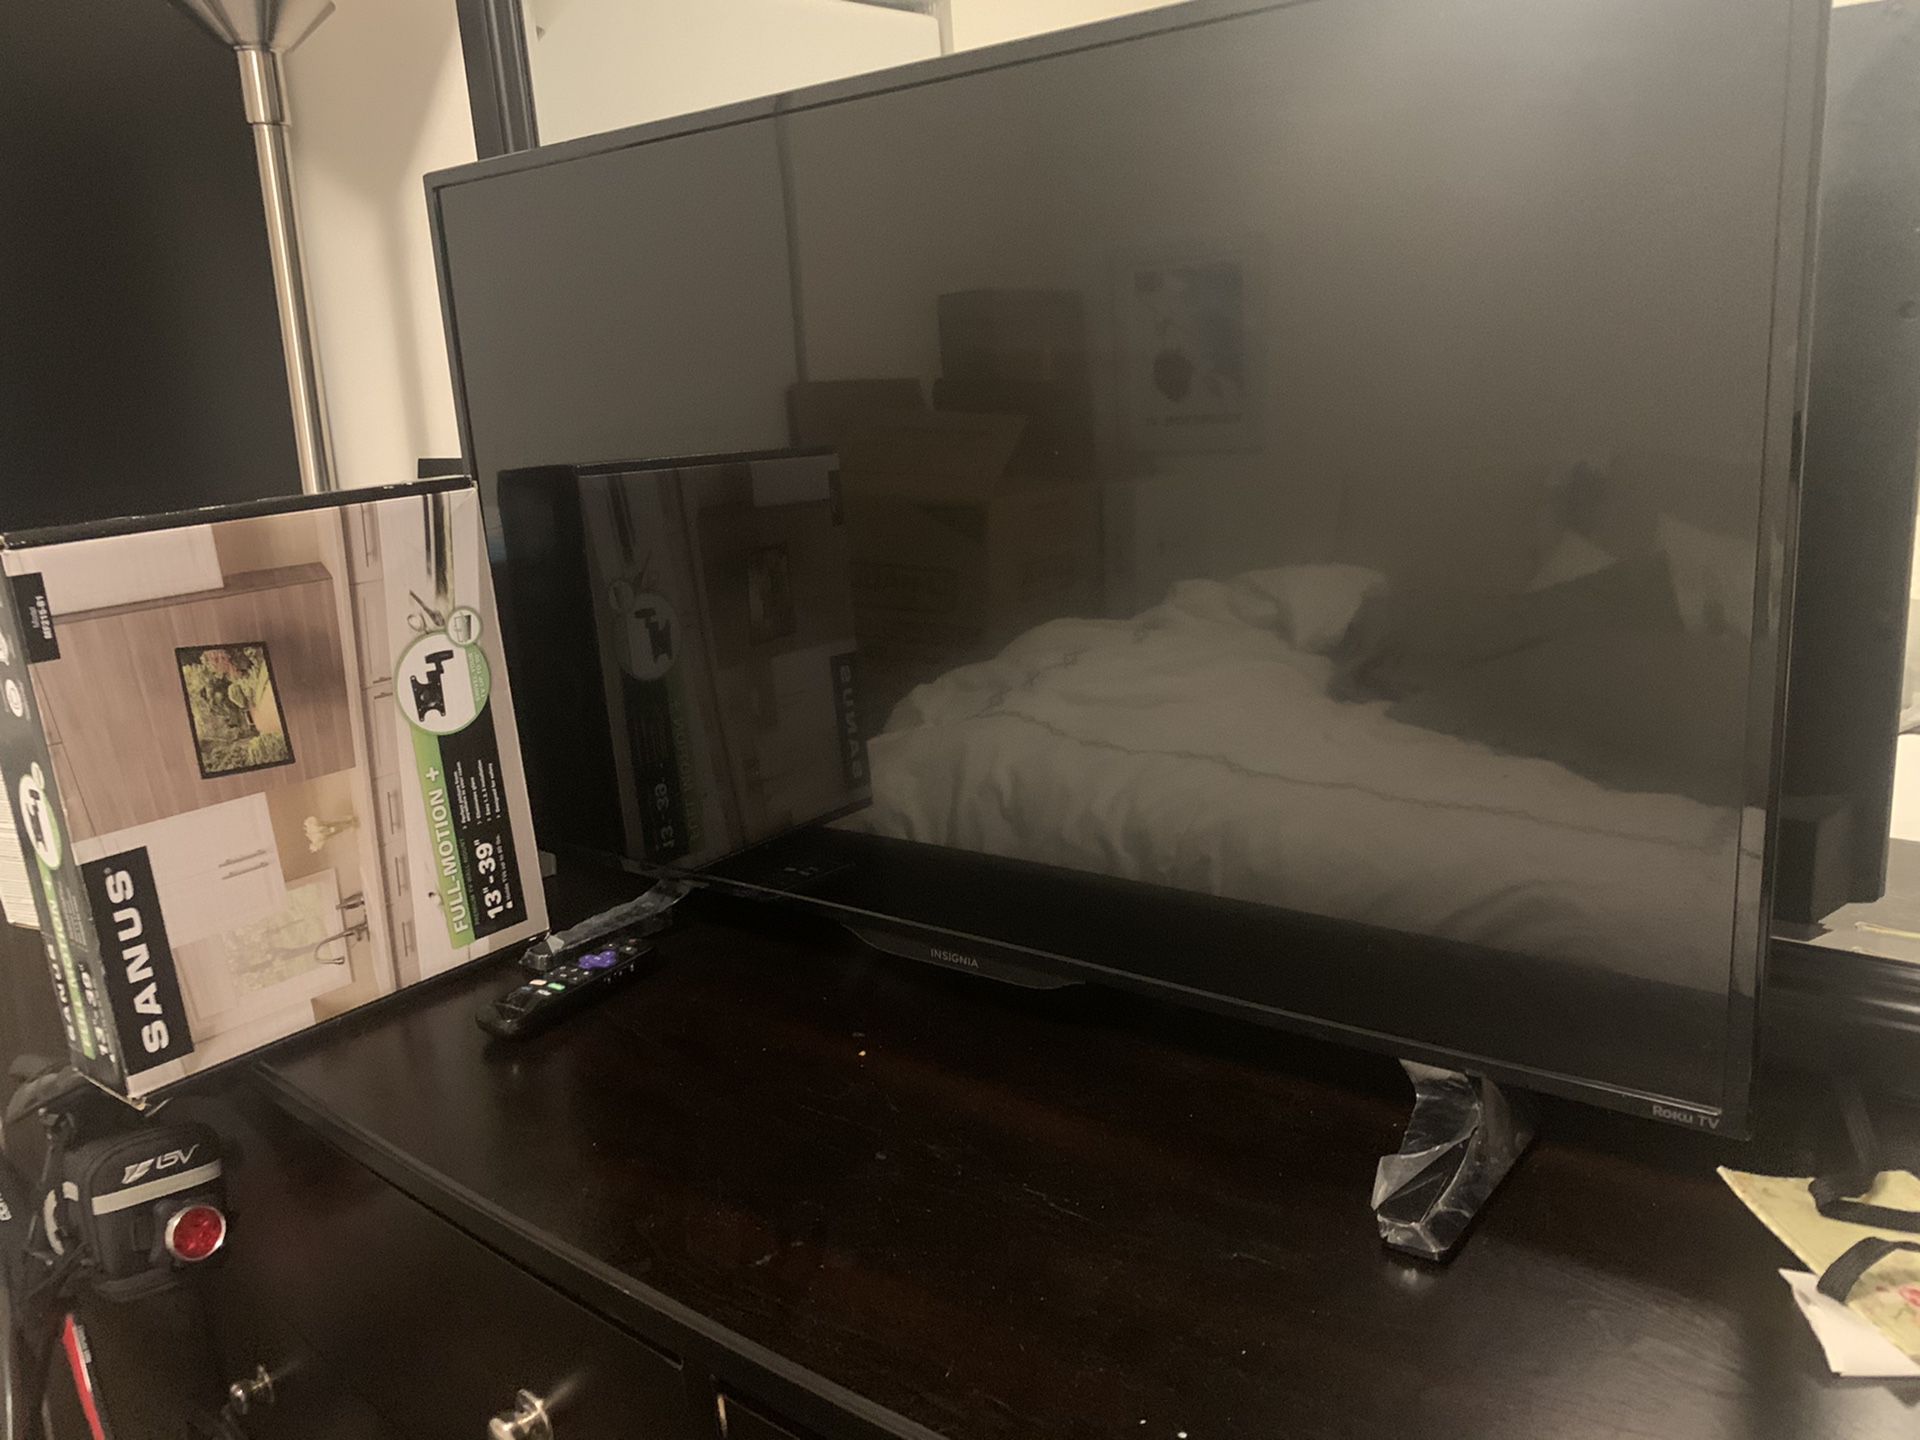 Insignia 32” TV and Wallmount Stand ($250 value)